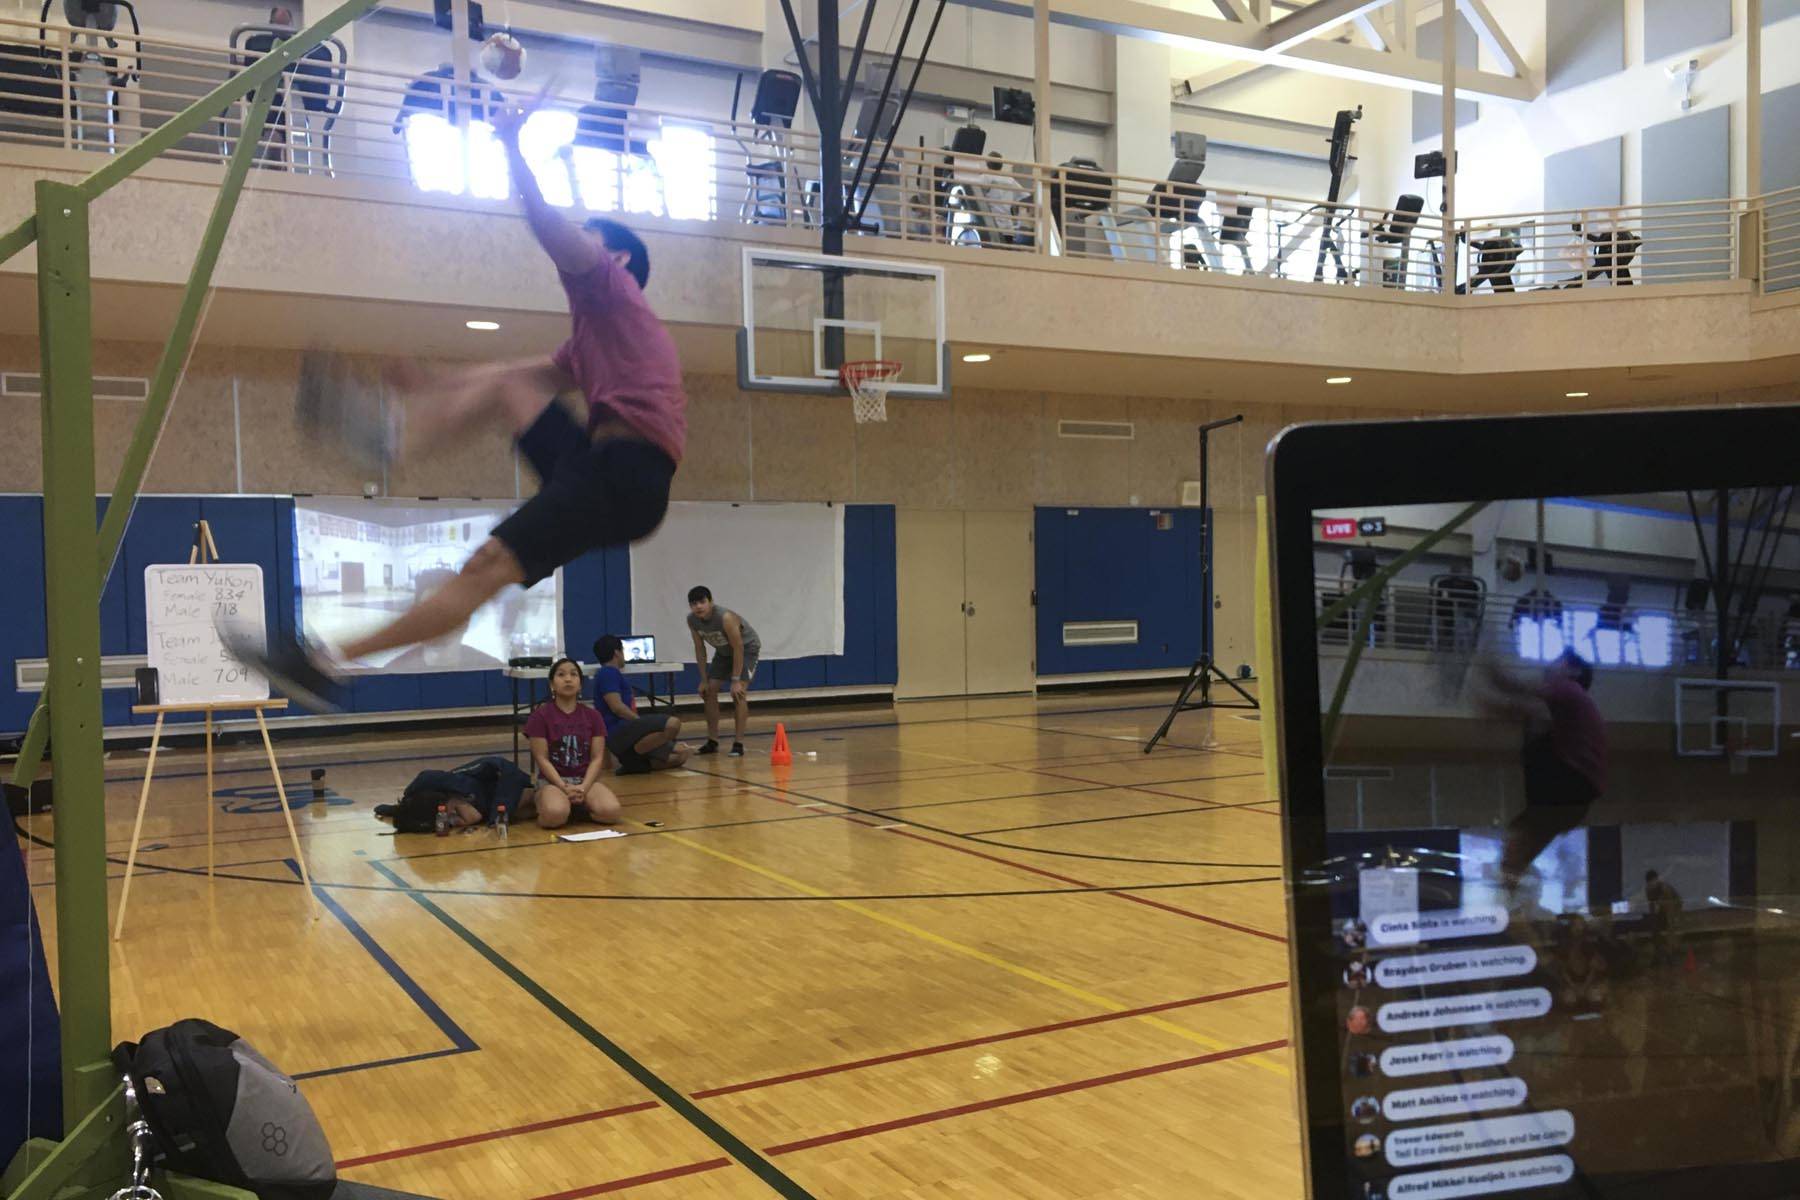 Matthew Quinto, a Thunder Mountain High School student, takes a shot at the one-foot high kick as members of Juneau’s Native Youth Olympic team compete against Whitehorse’s Team Yukon in a traditional games competition over livestreaming video at the University of Alaska Southeast rec center on March 17, 2020. (Michael S. Lockett | Juneau Empire)